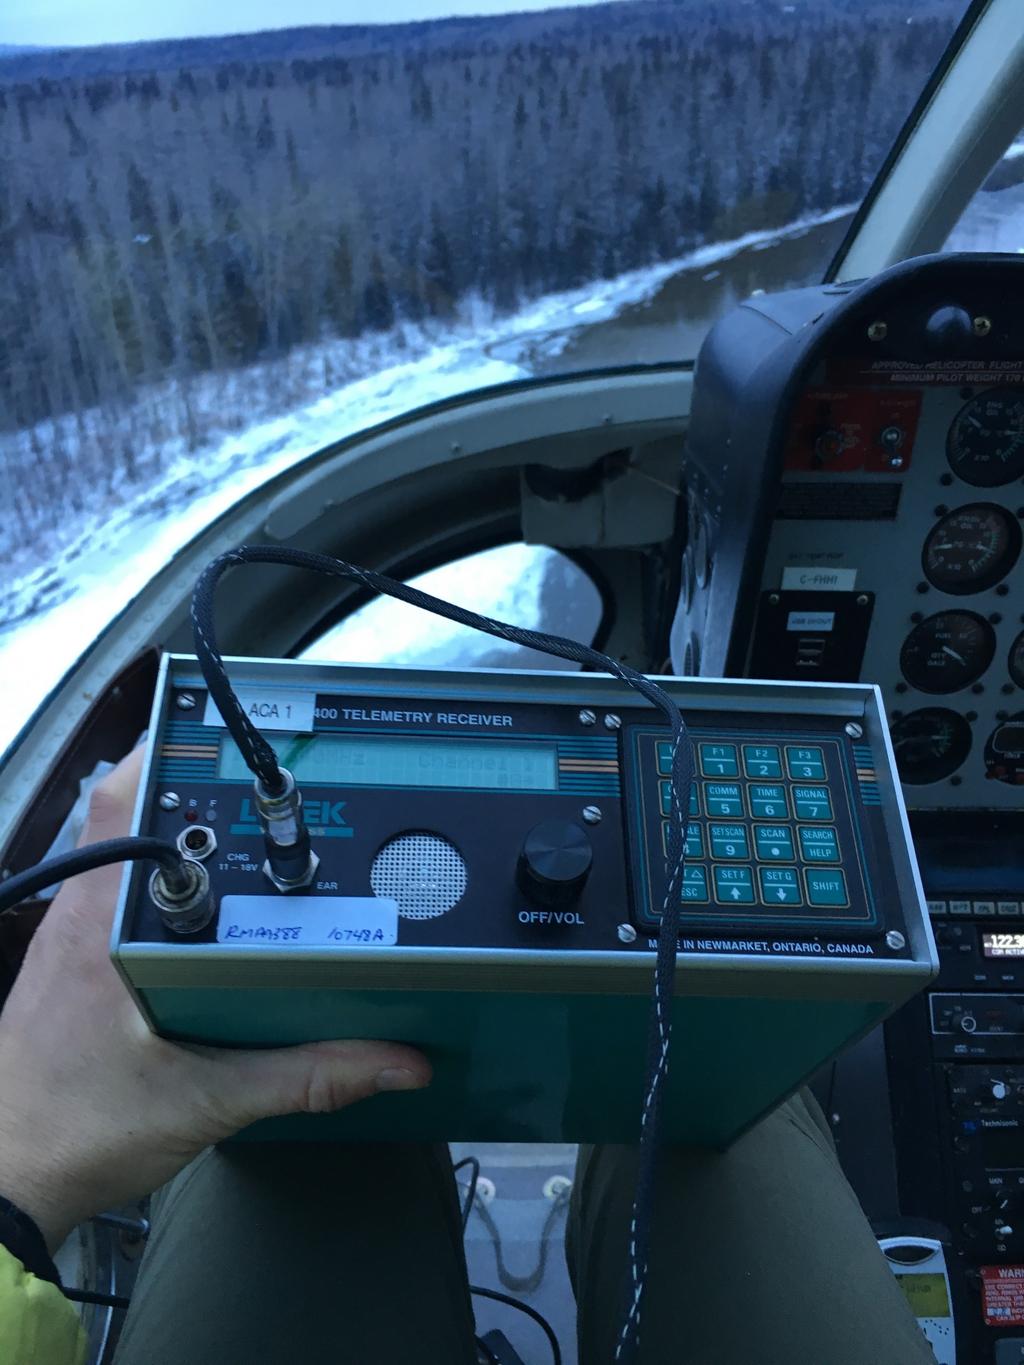 Telemetry equipment in use during an